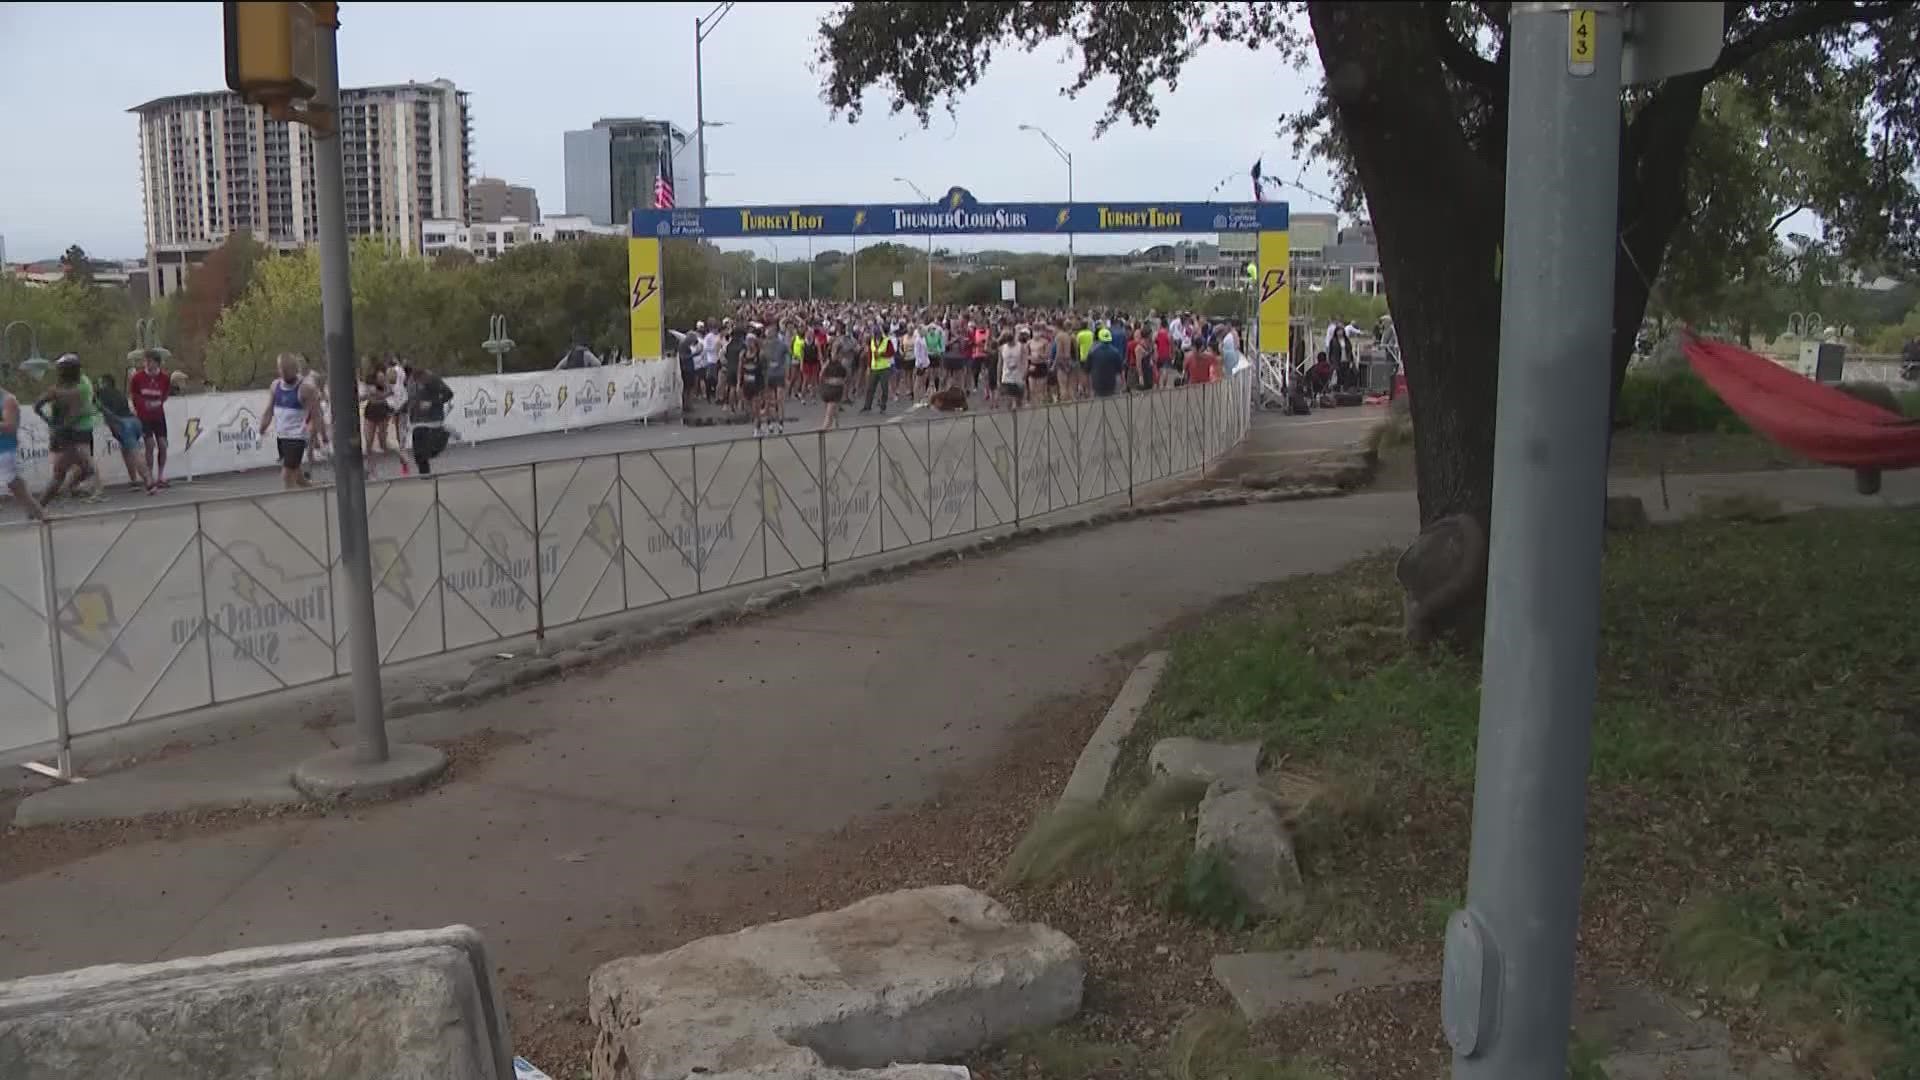 For the last 32 years, families across Austin have participated in the Turkey Trot to run before their meal and to raise money for the community.